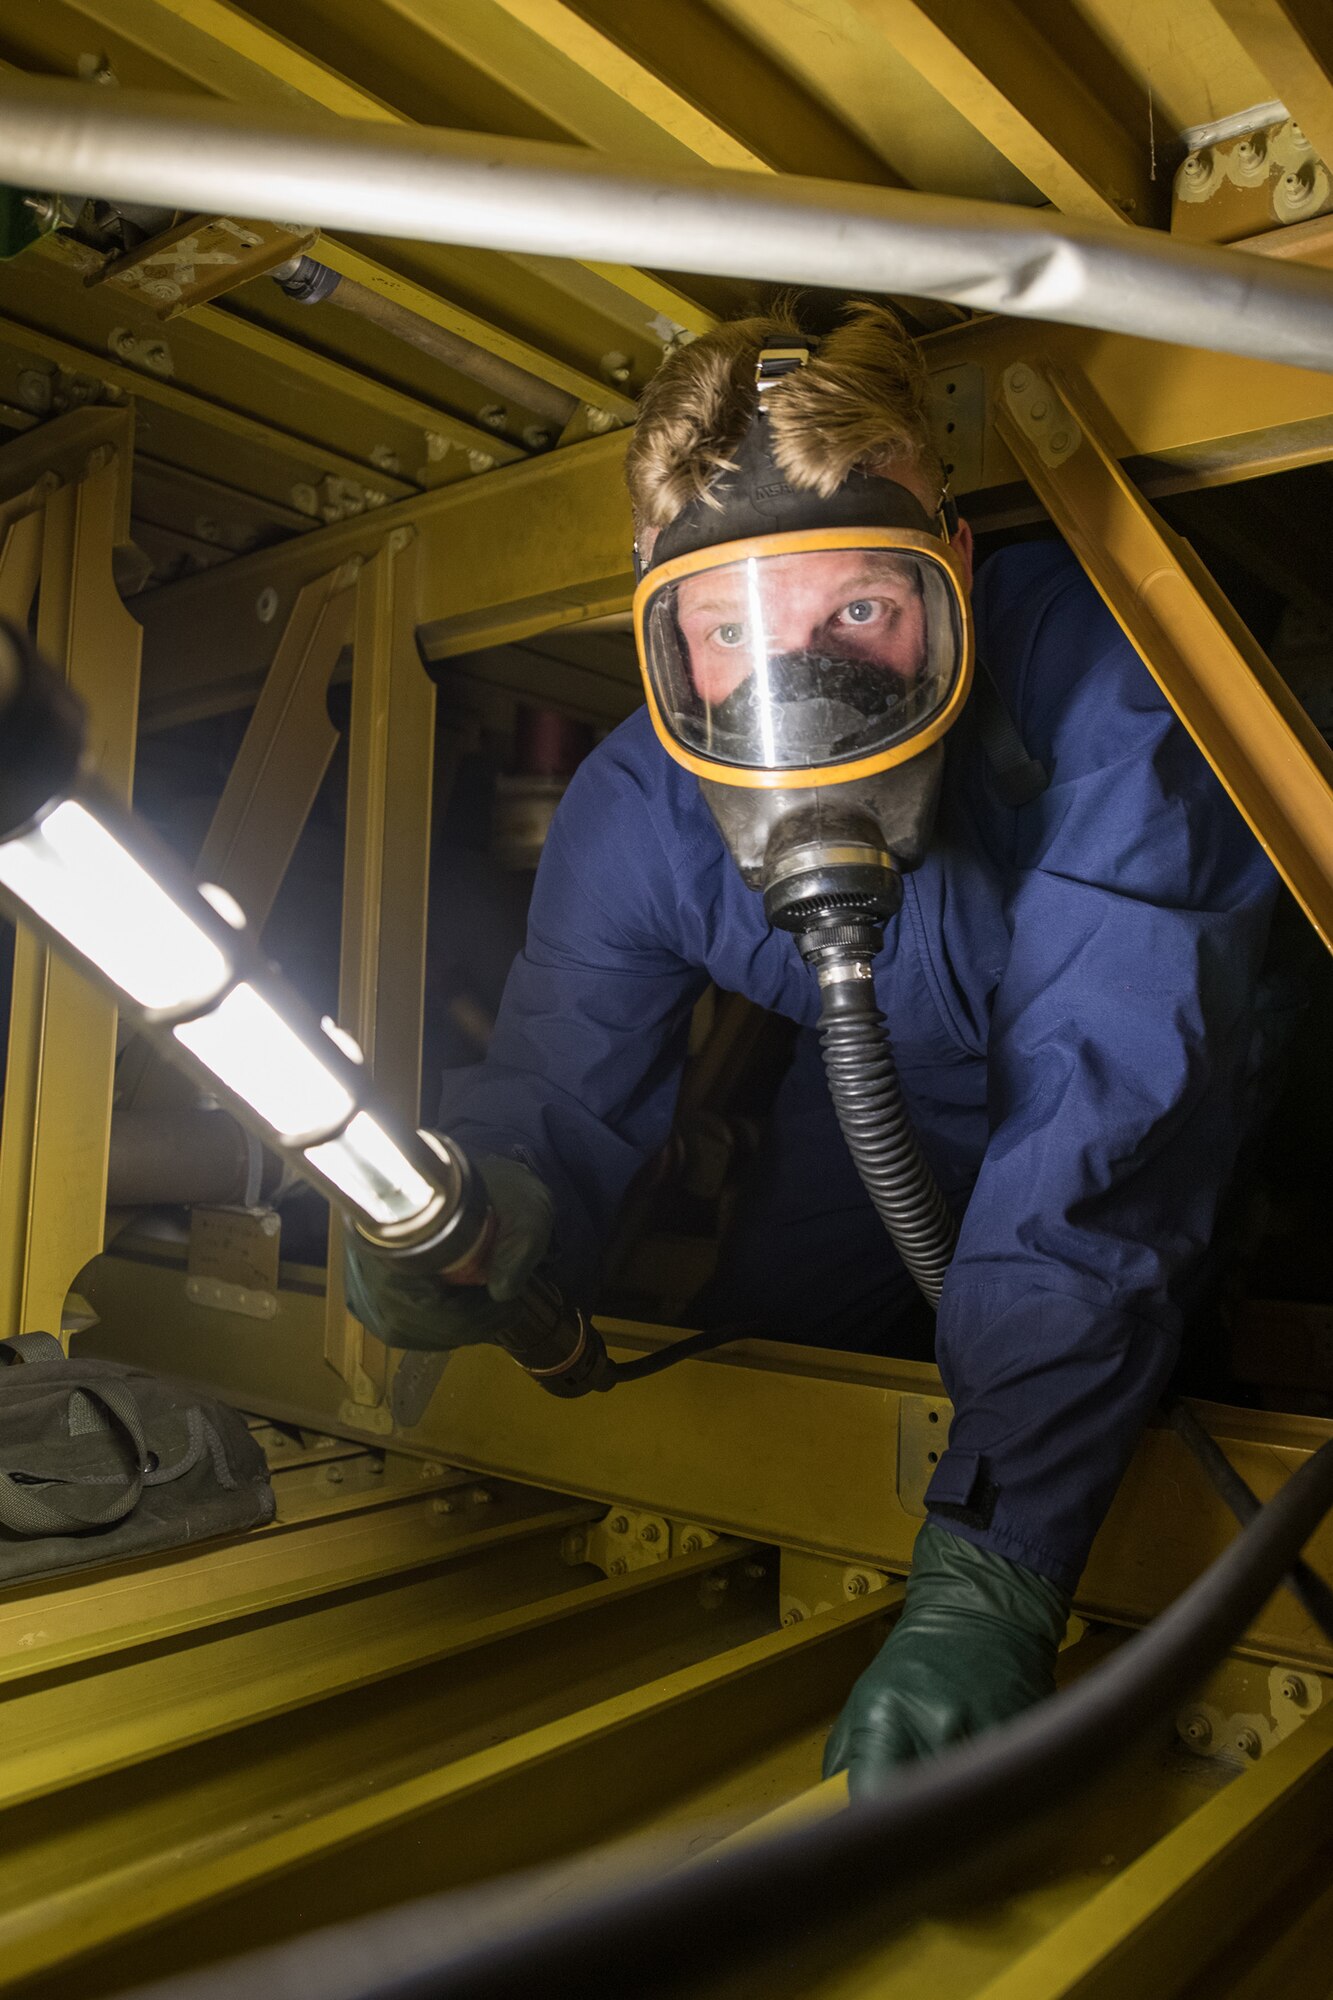 Senior Airman Caleb Osland, 436th Maintenance Squadron fuel systems repair journeyman, practices moving through an aircraft wing to remove and replace sealant from a tank boundary June 27, 2019, at Dover Air Force Base, Del. Airmen must traverse tightly enclosed spaces while wearing proper safety equipment.
(U.S. Air Force photo by Mauricio Campino)